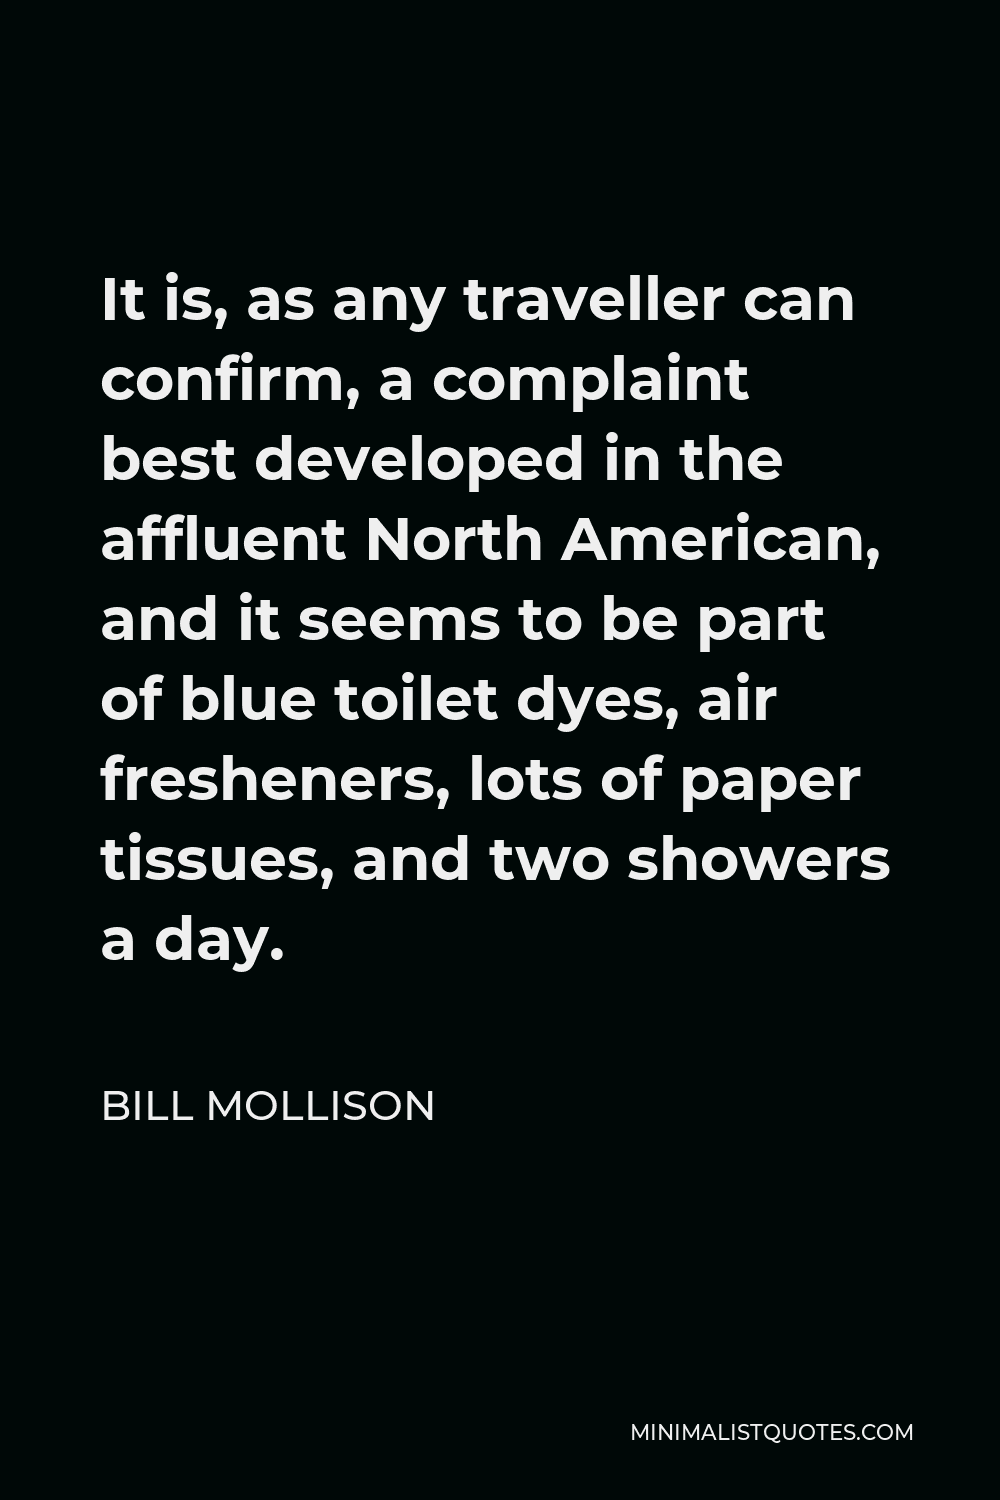 Bill Mollison Quote - It is, as any traveller can confirm, a complaint best developed in the affluent North American, and it seems to be part of blue toilet dyes, air fresheners, lots of paper tissues, and two showers a day.